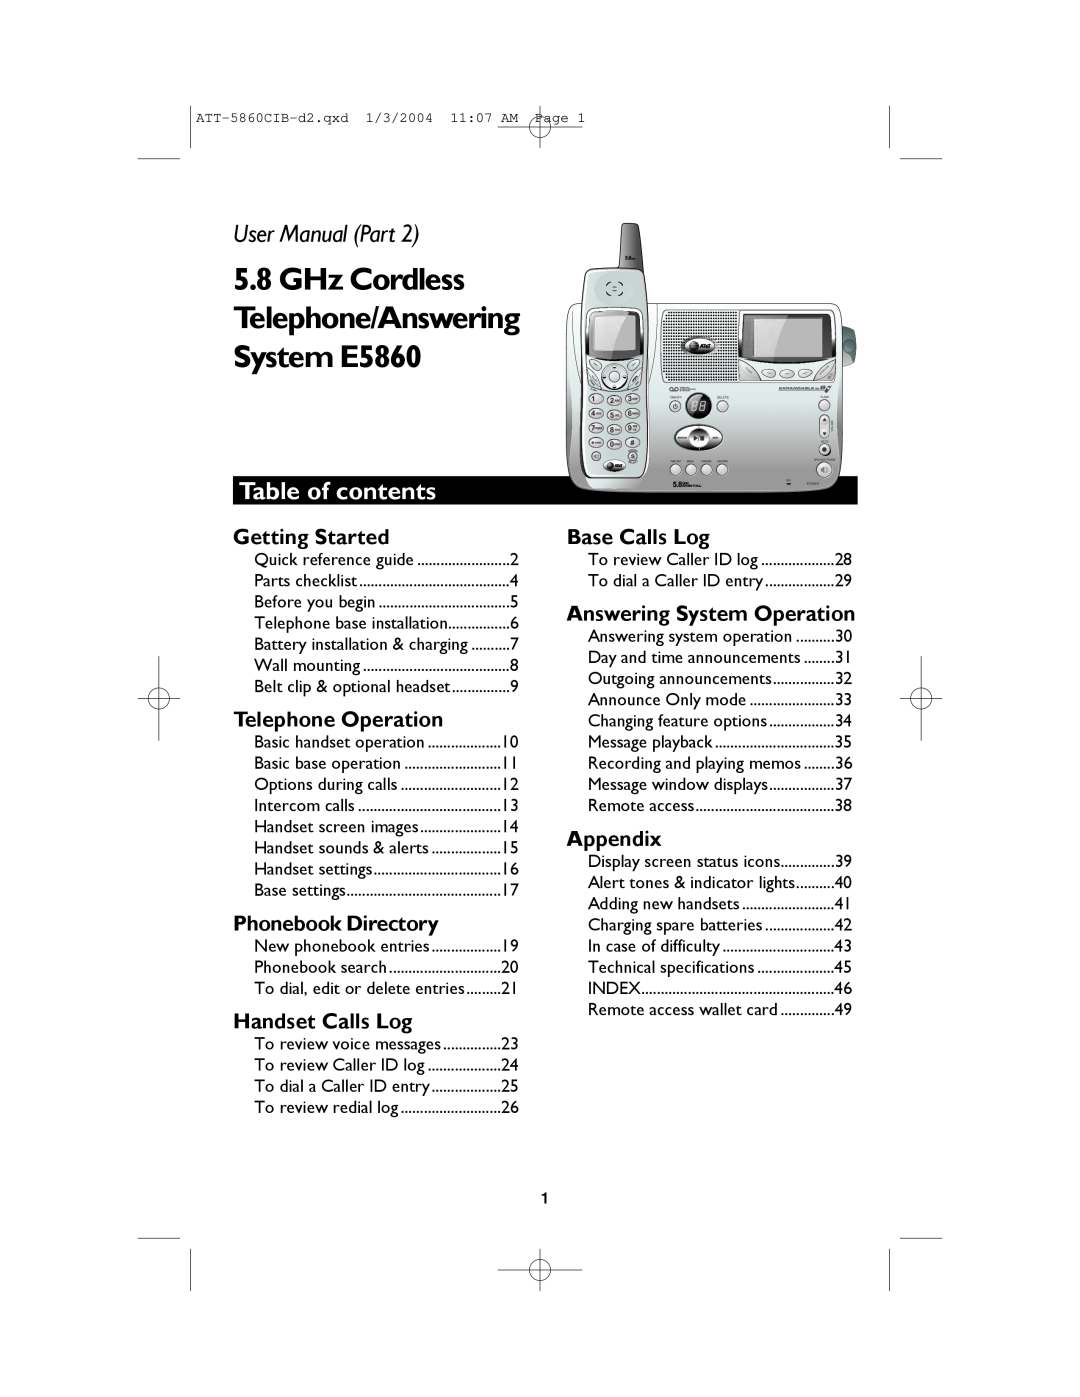 AT&T E5860 Table of contents, Getting Started, Telephone Operation, Phonebook Directory, Handset Calls Log, Base Calls Log 